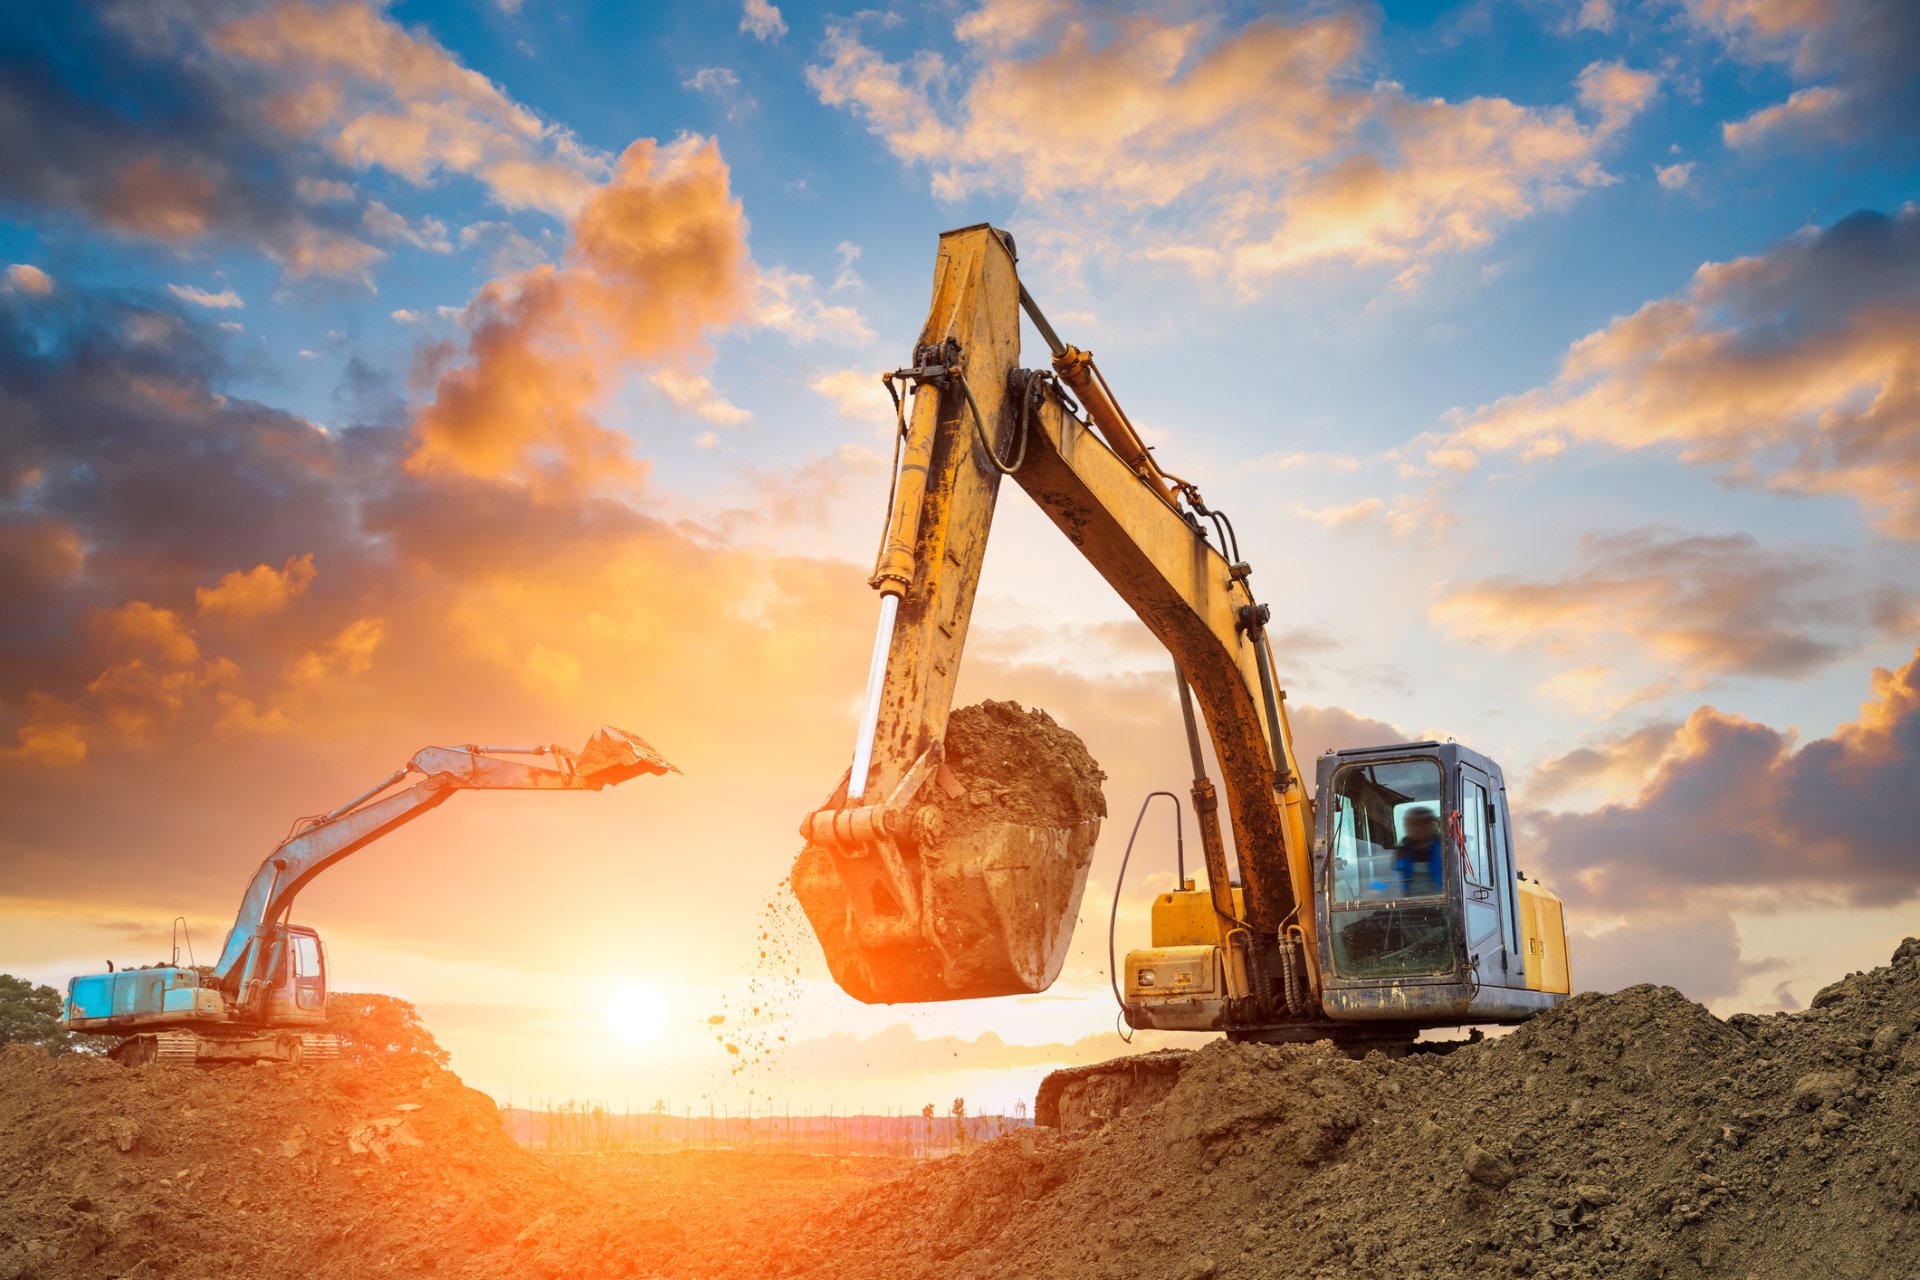 How to Get Jobs with Excavation Companies